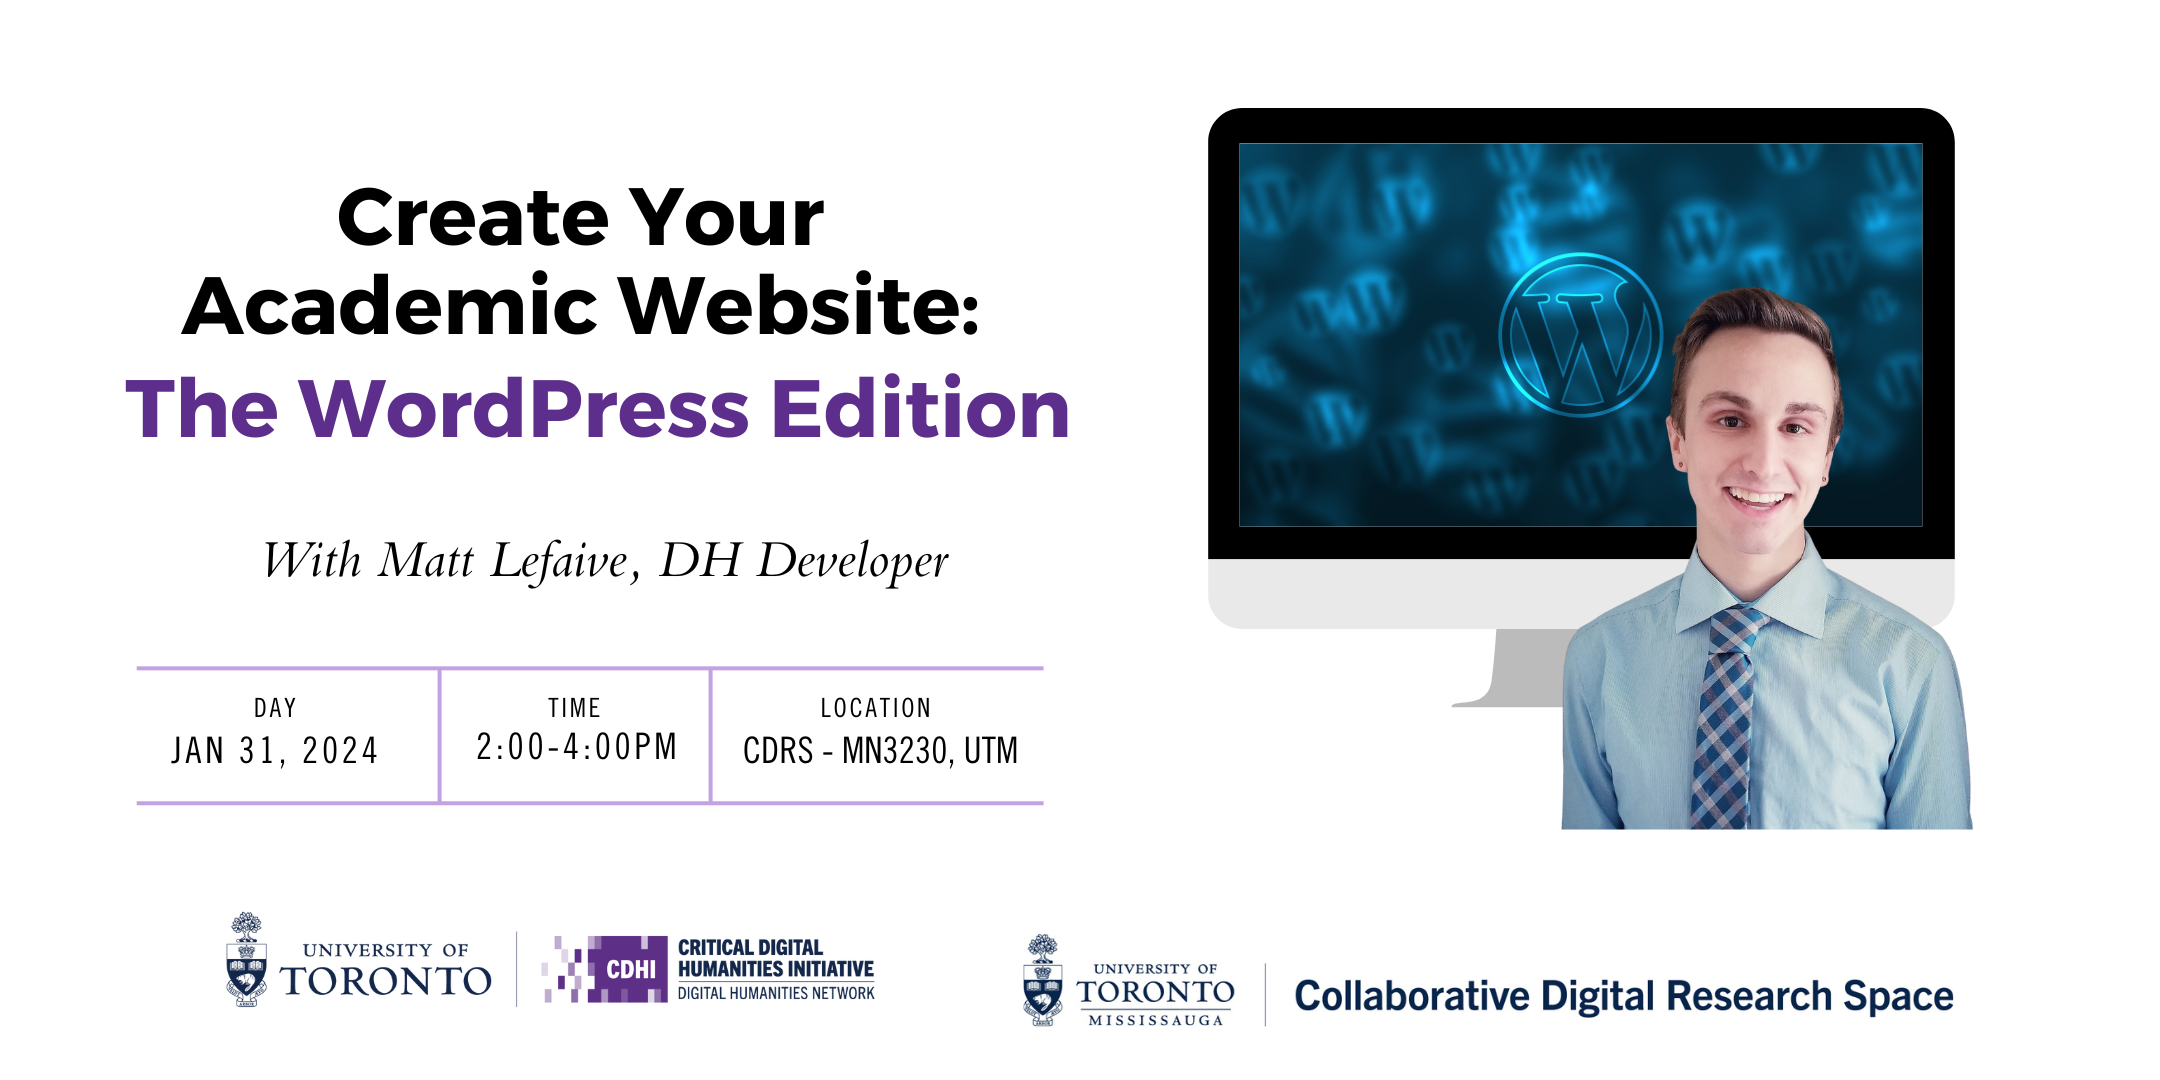 Create your academic website. The WordPress edition. Workshop on Wednesday, January 31, 2024. 2:00–4:00 pm. Held at the Collaborative Digital Research Space at UTM. Registration on Eventbrite is required.